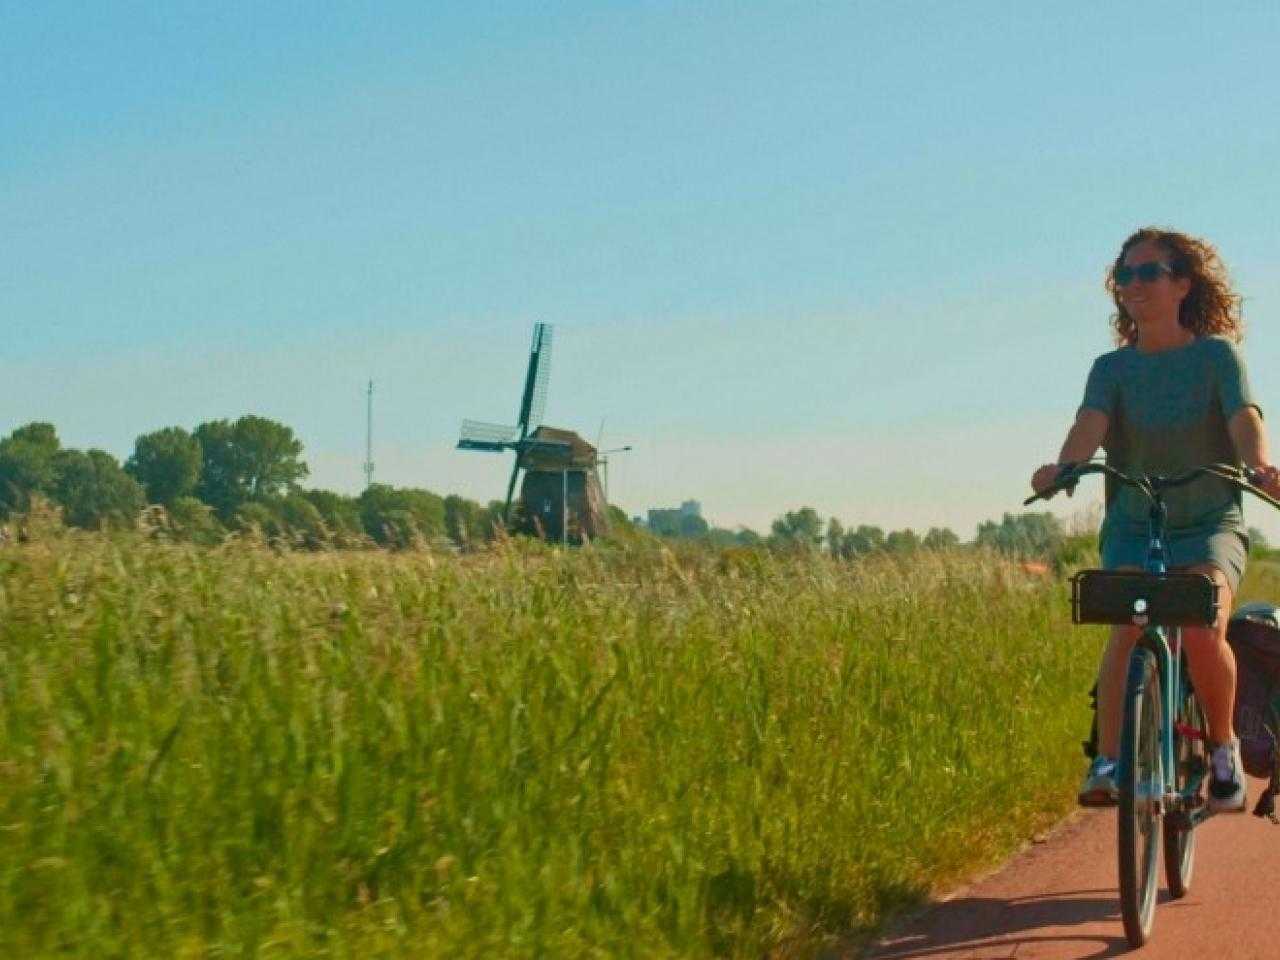 Cycling on the Ringdijk with a windmill in the background